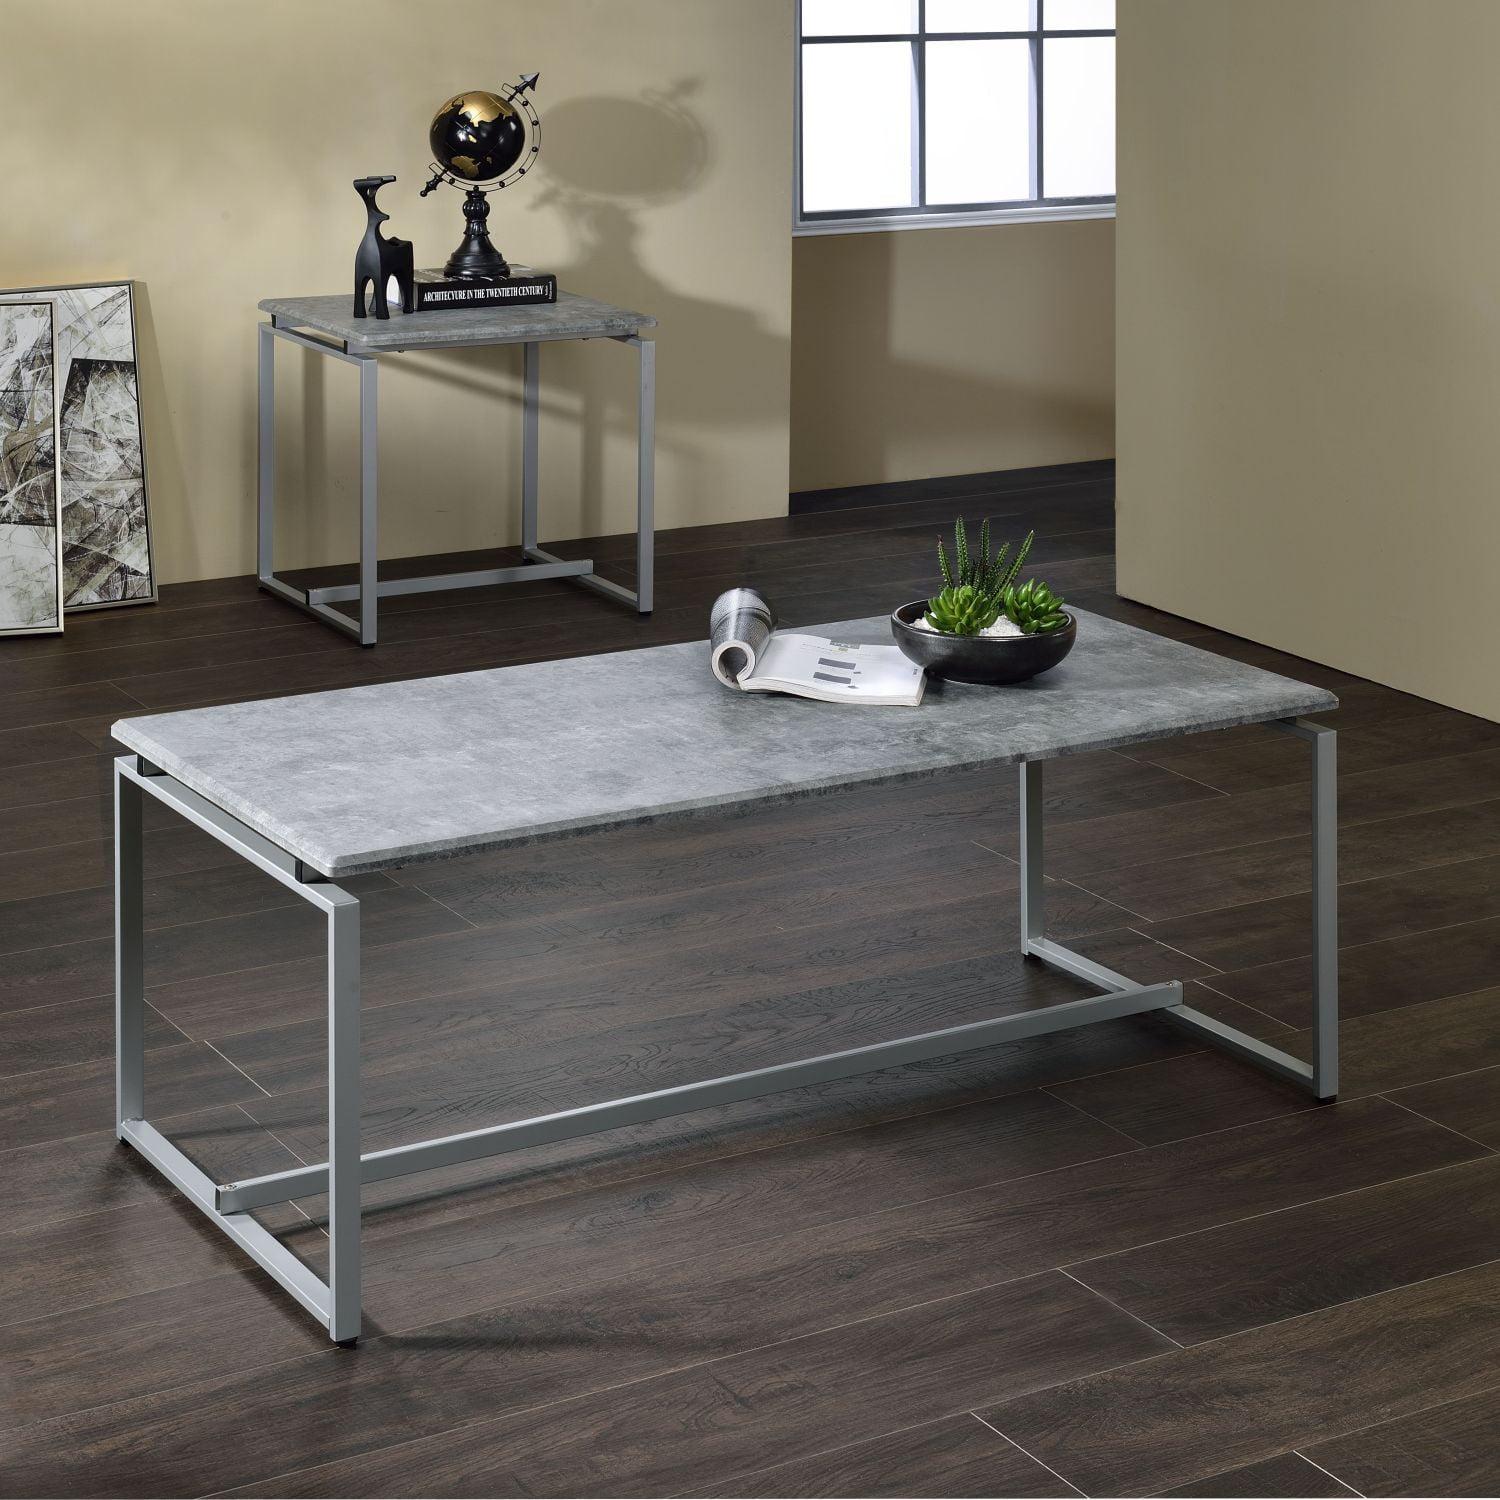 52'' Modern Faux Concrete and Silver Coffee Table Set